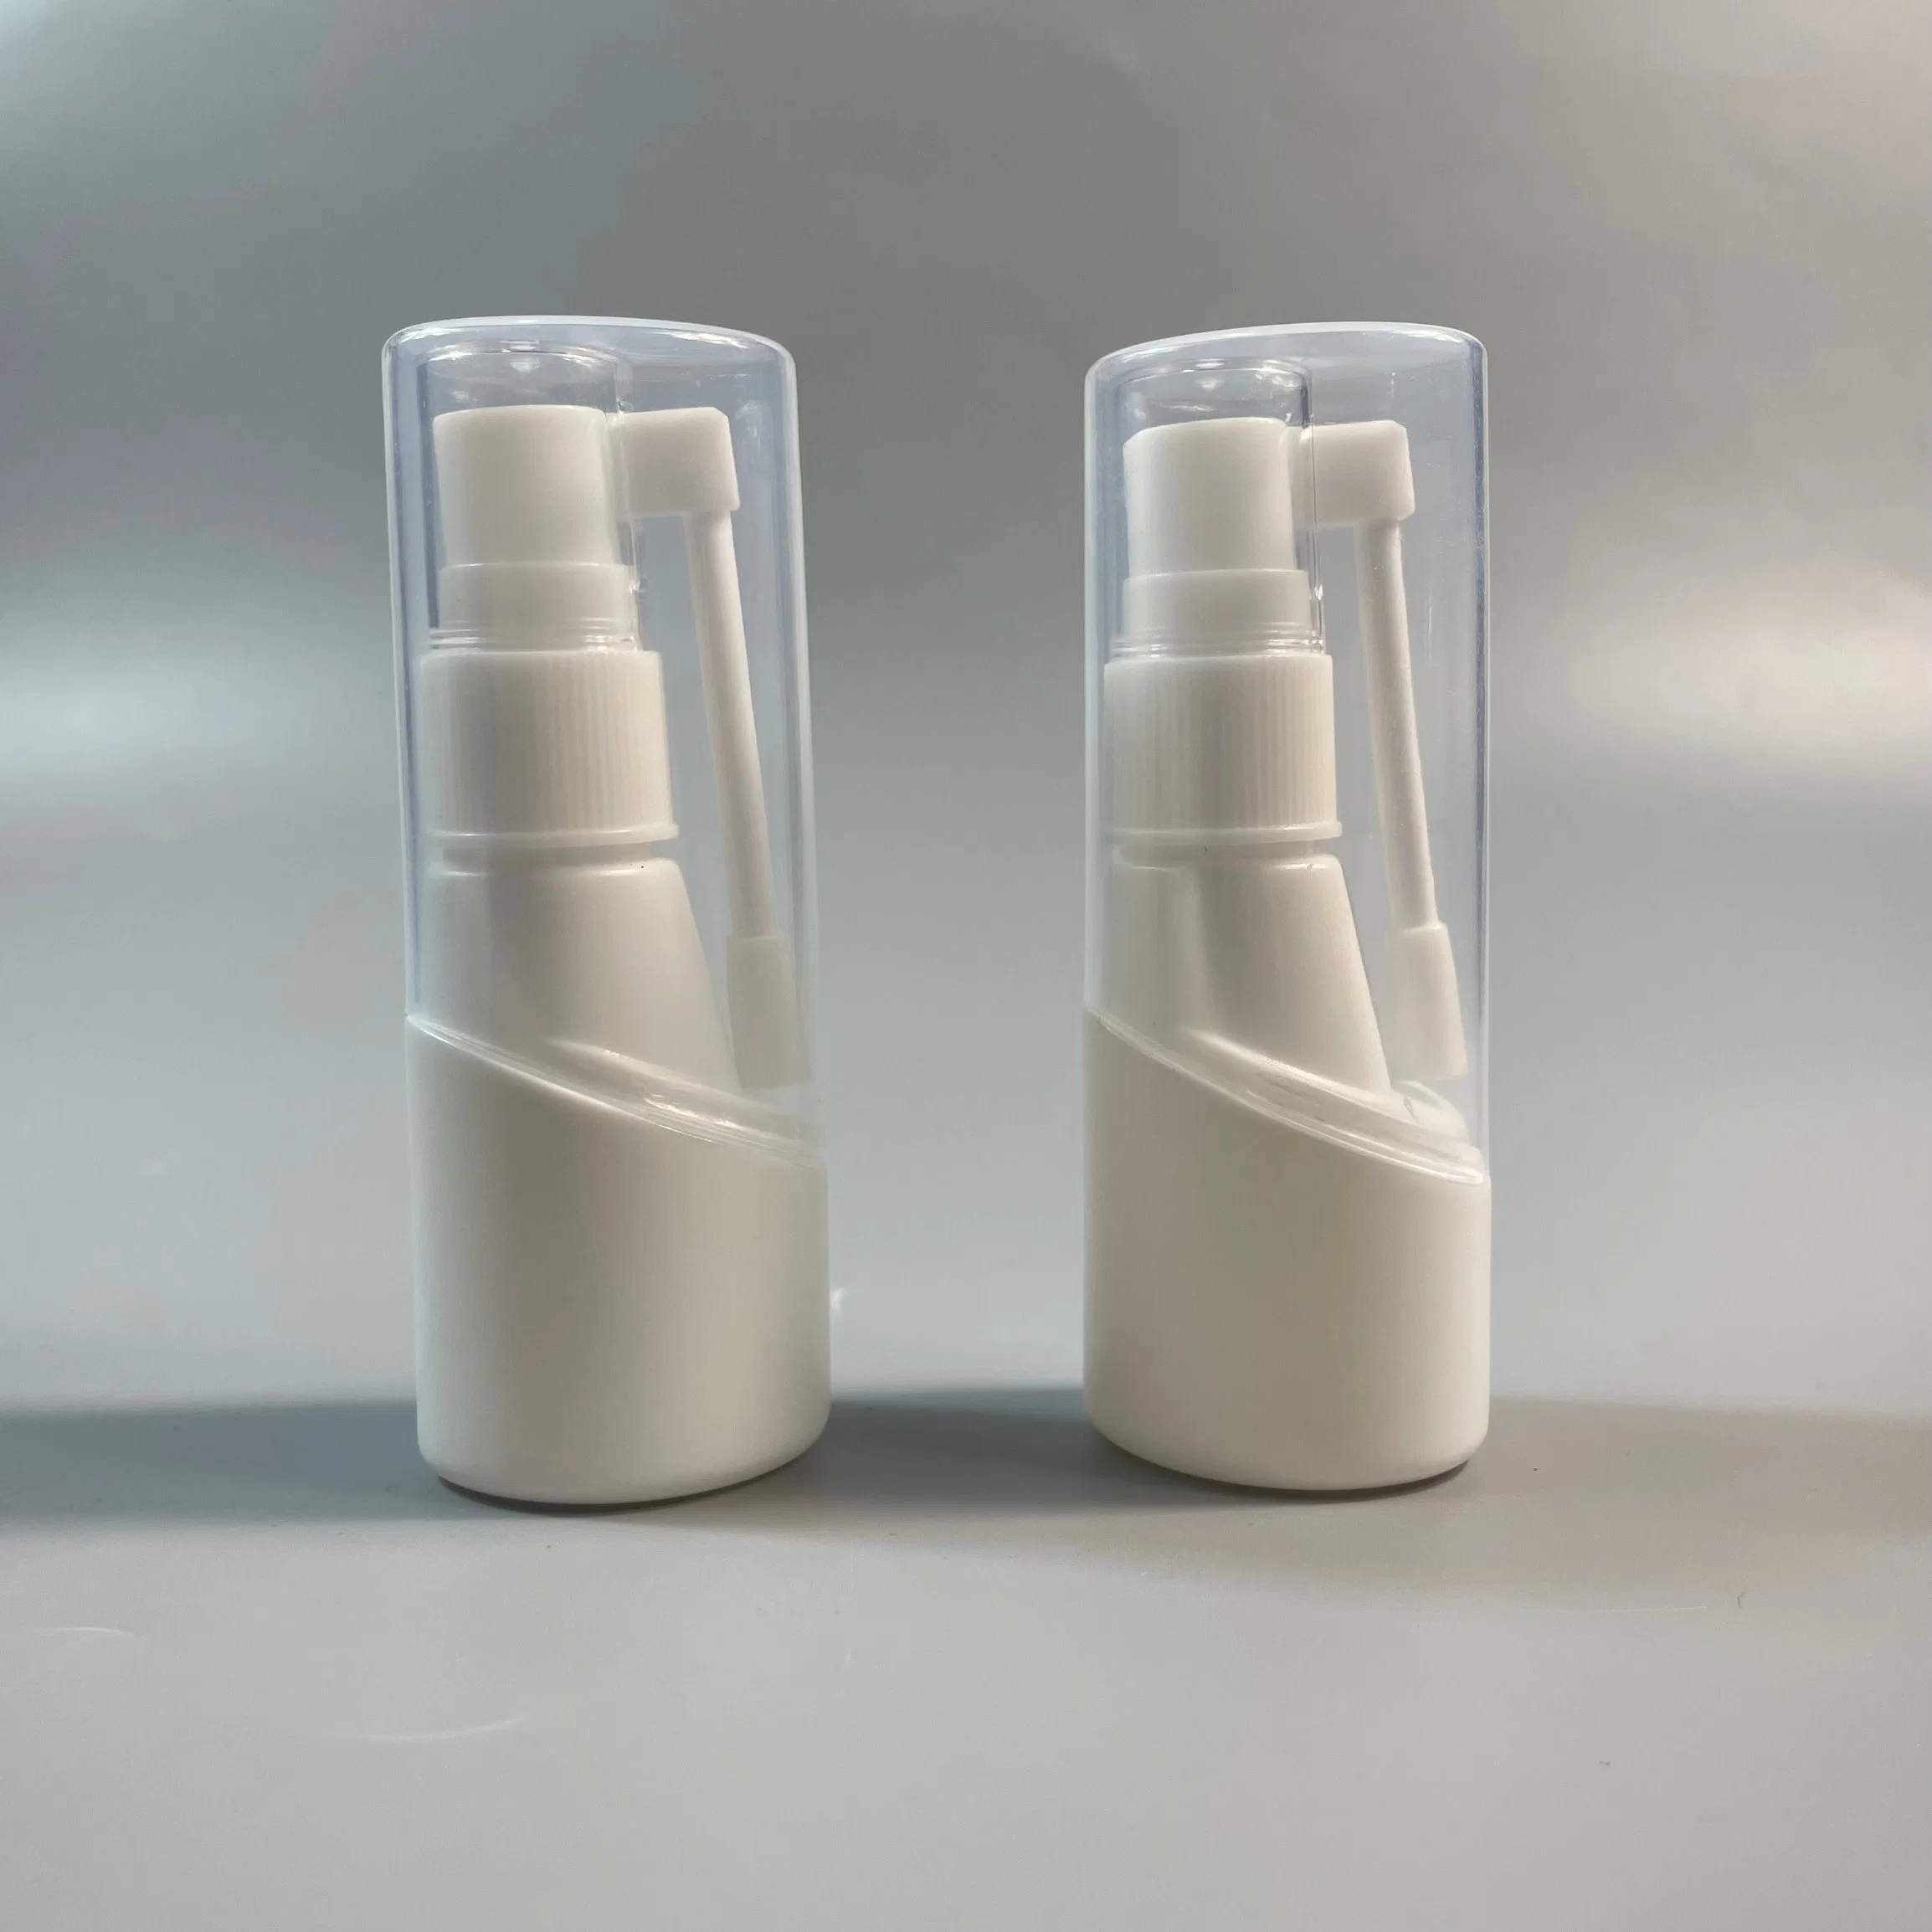 30ml /1oz 50ml Empty Refillable White Plastic Medical Mouth Oral Spray Bottles Pump Sprayer Container Vial for Saline Water Wash